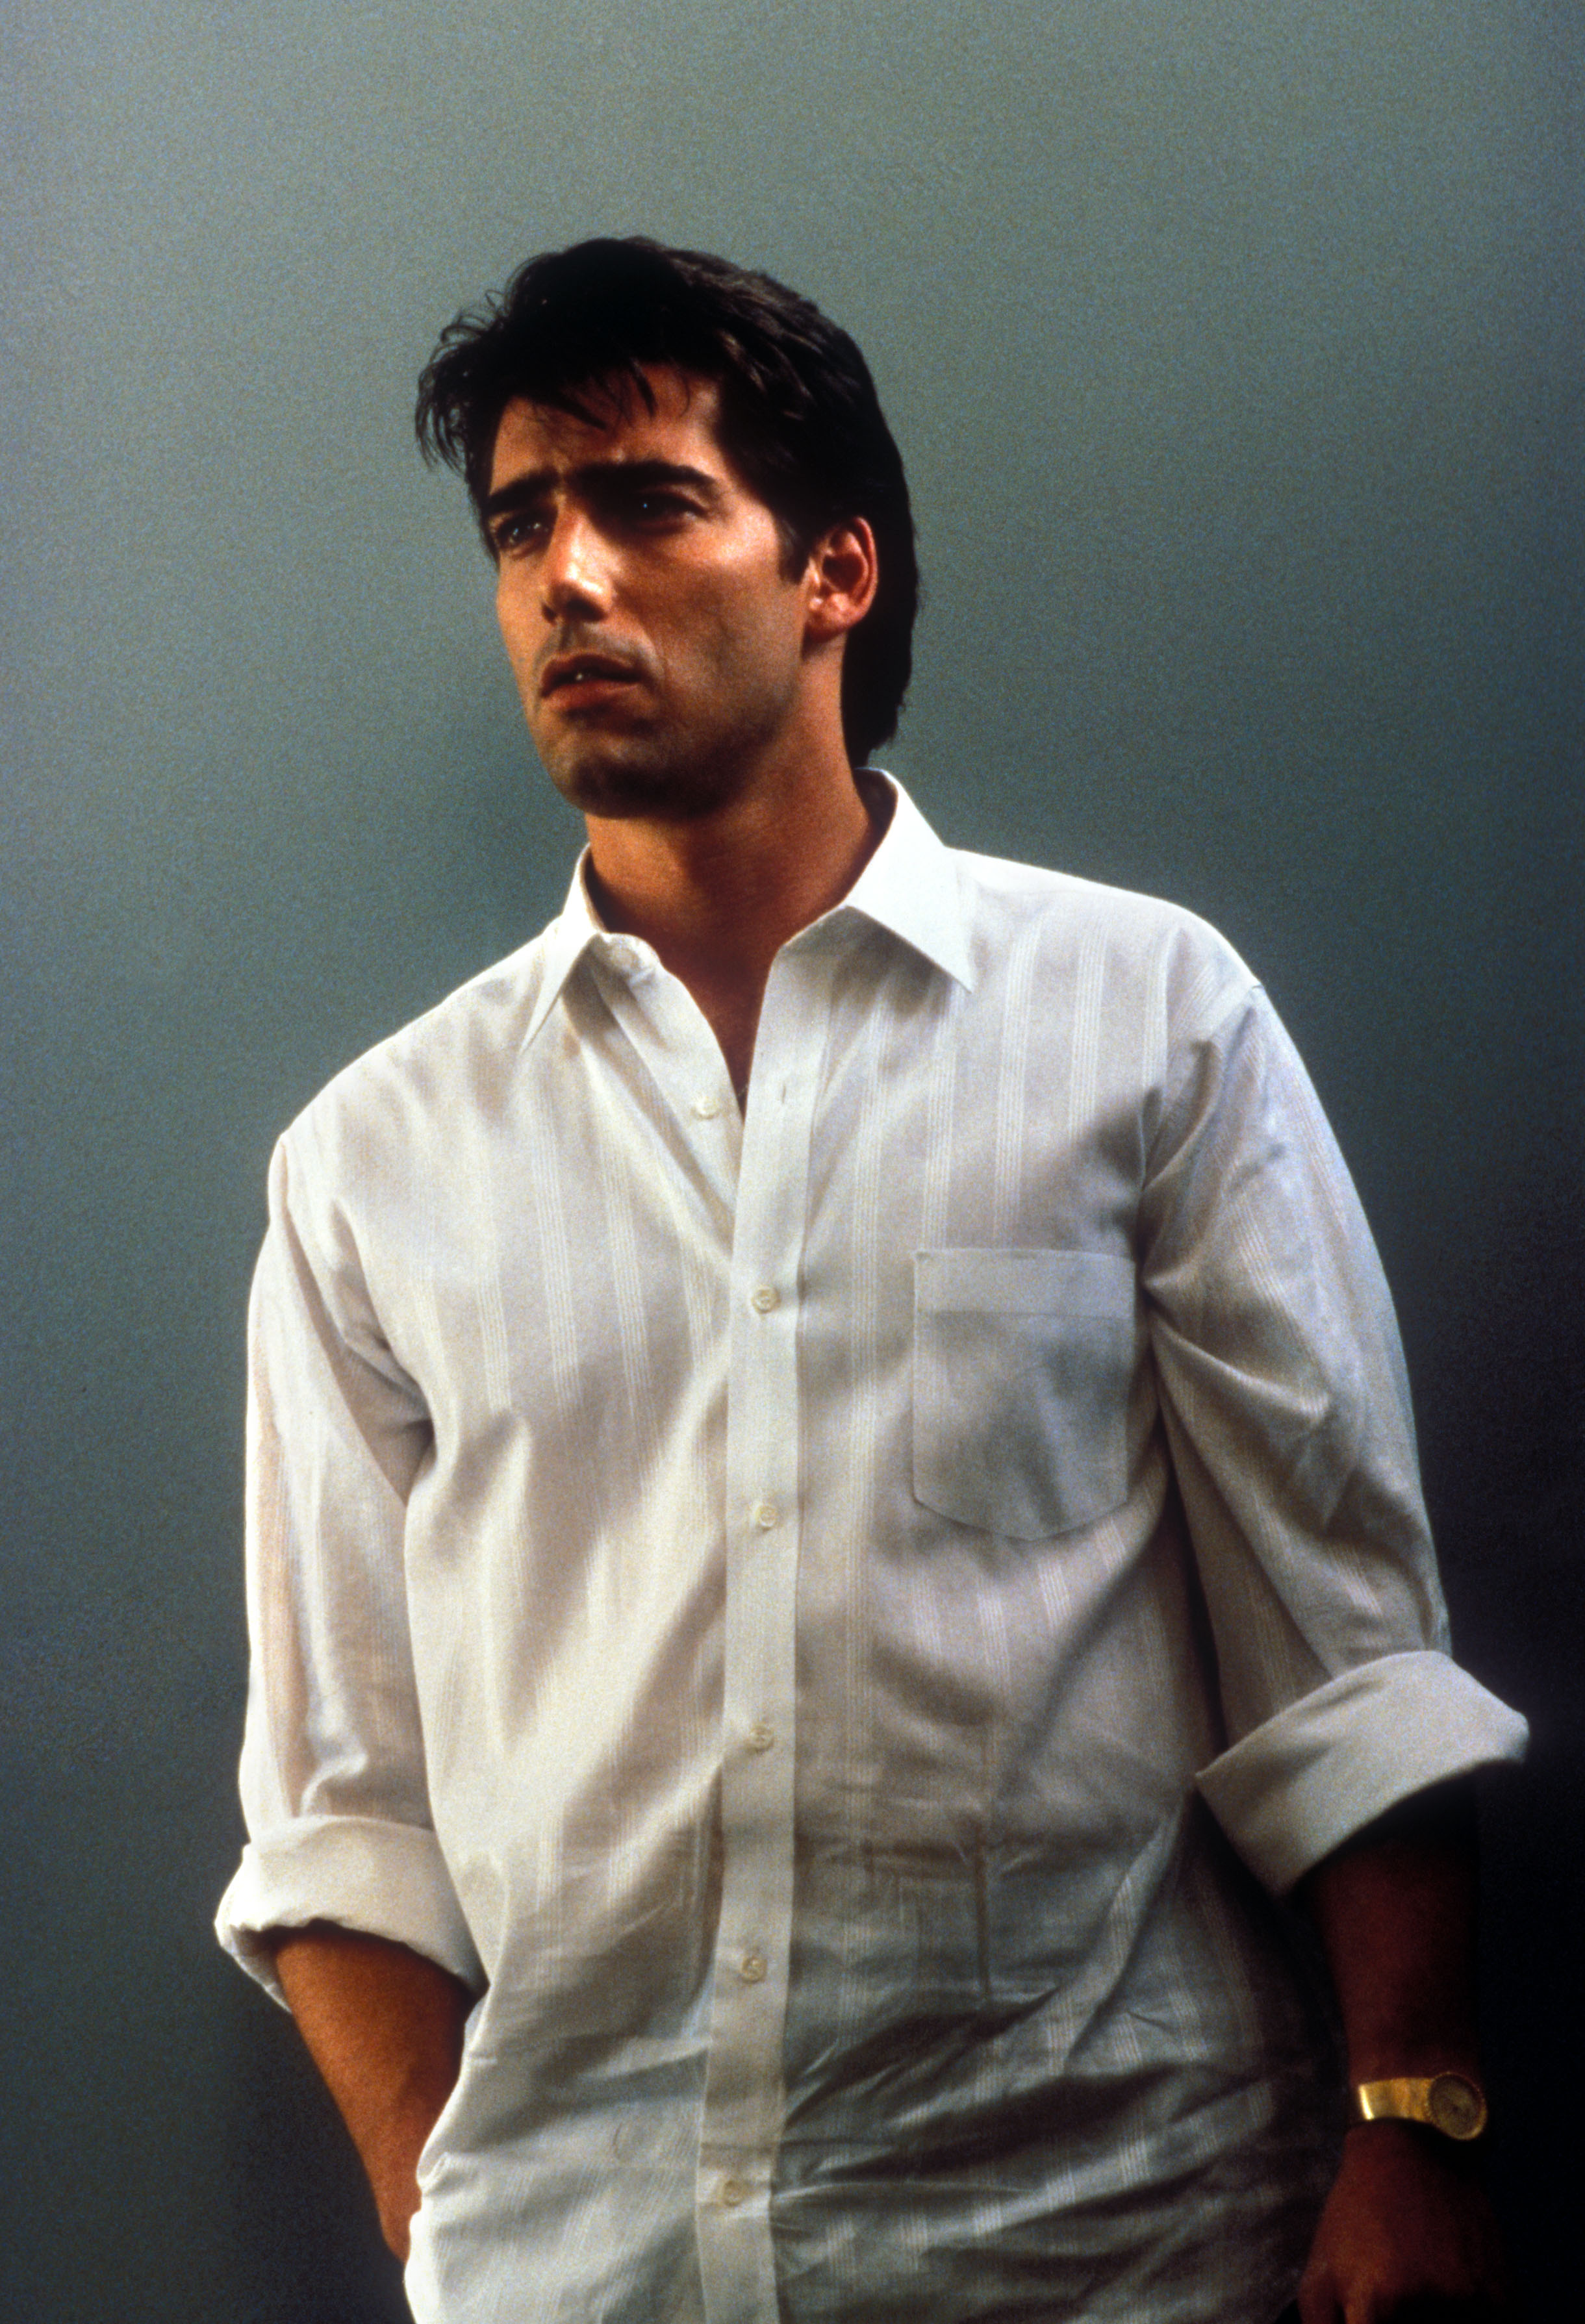 Ken Wahl 2019 The Actor on 'Wiseguy' and His Work for Veterans